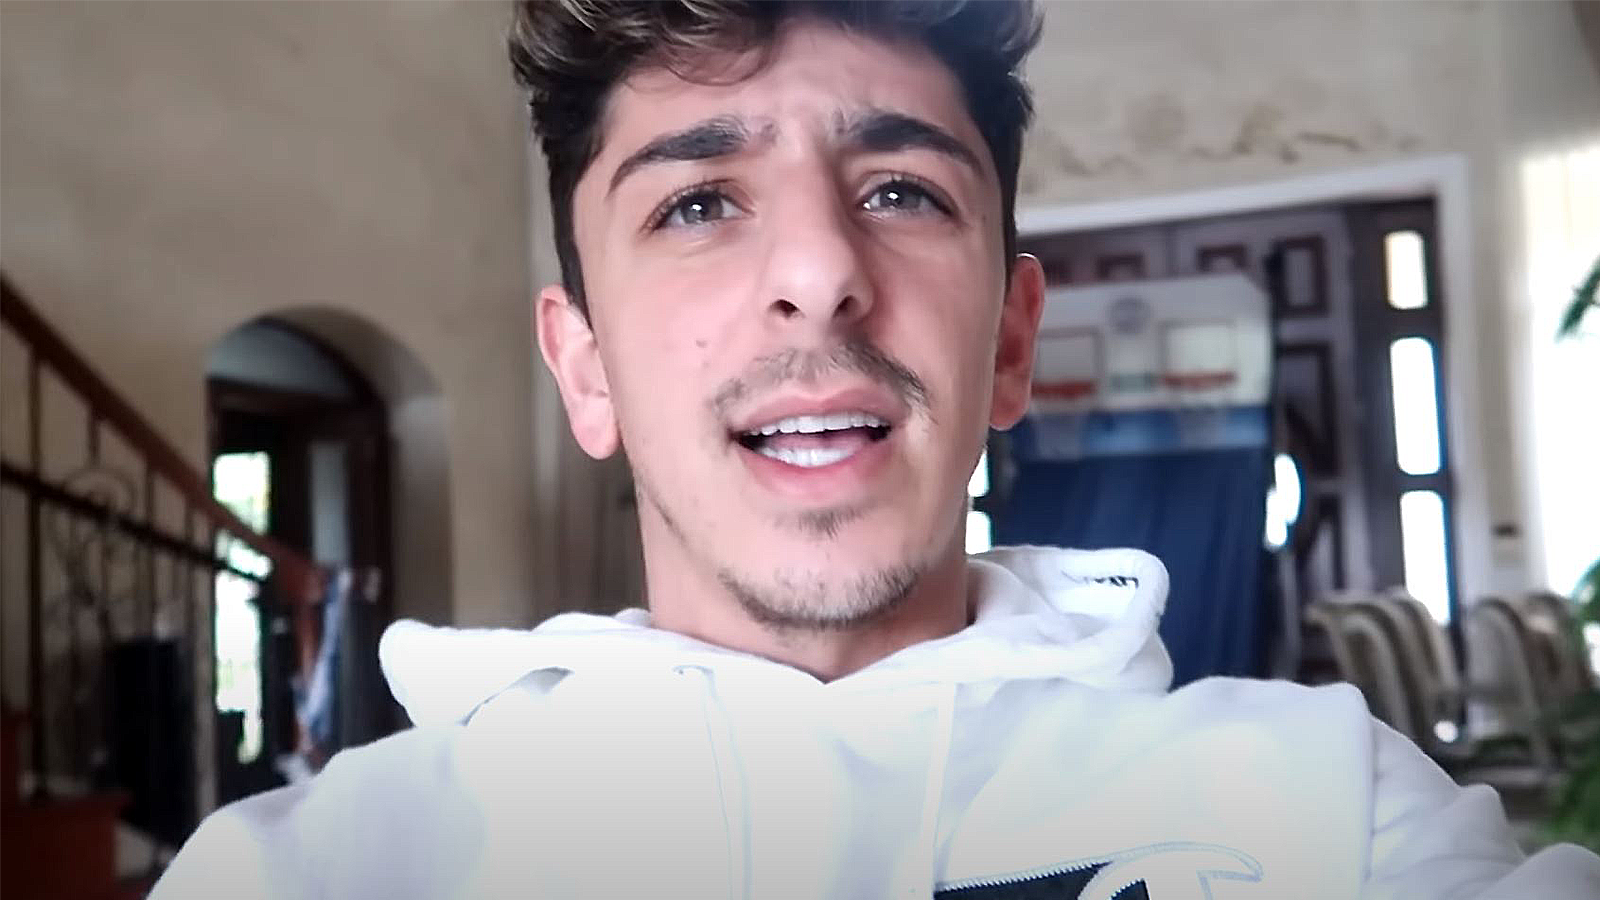 Faze Rug Scared After Fan Shows Up At His Home Dexerto